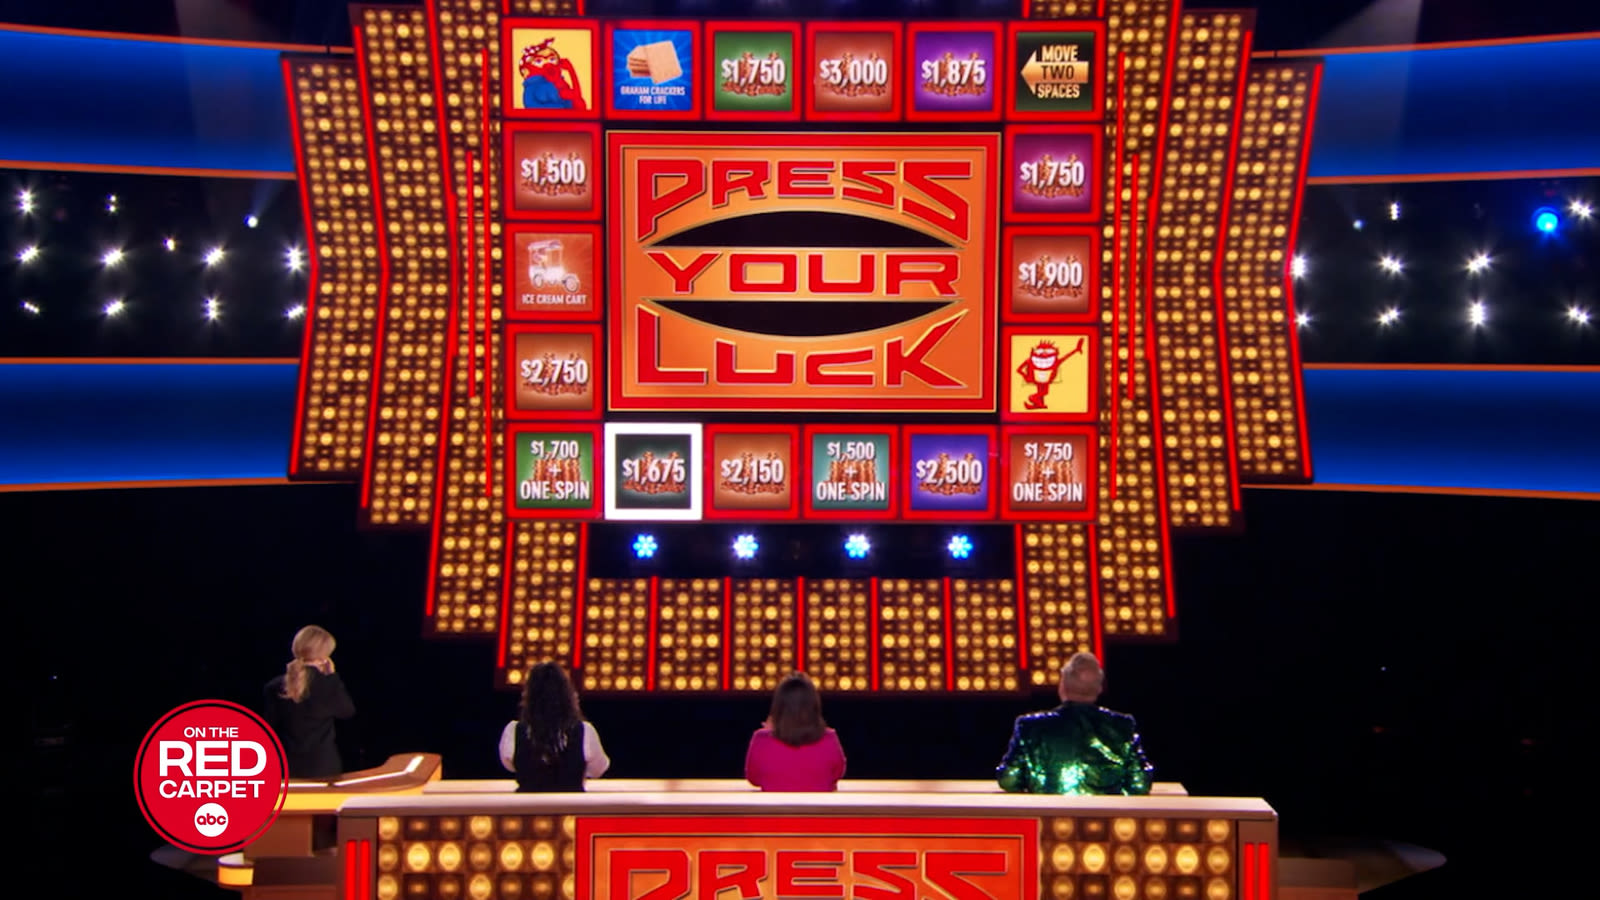 Elizabeth Banks and her "annoying co-star" return for new season of 'Press Your Luck'